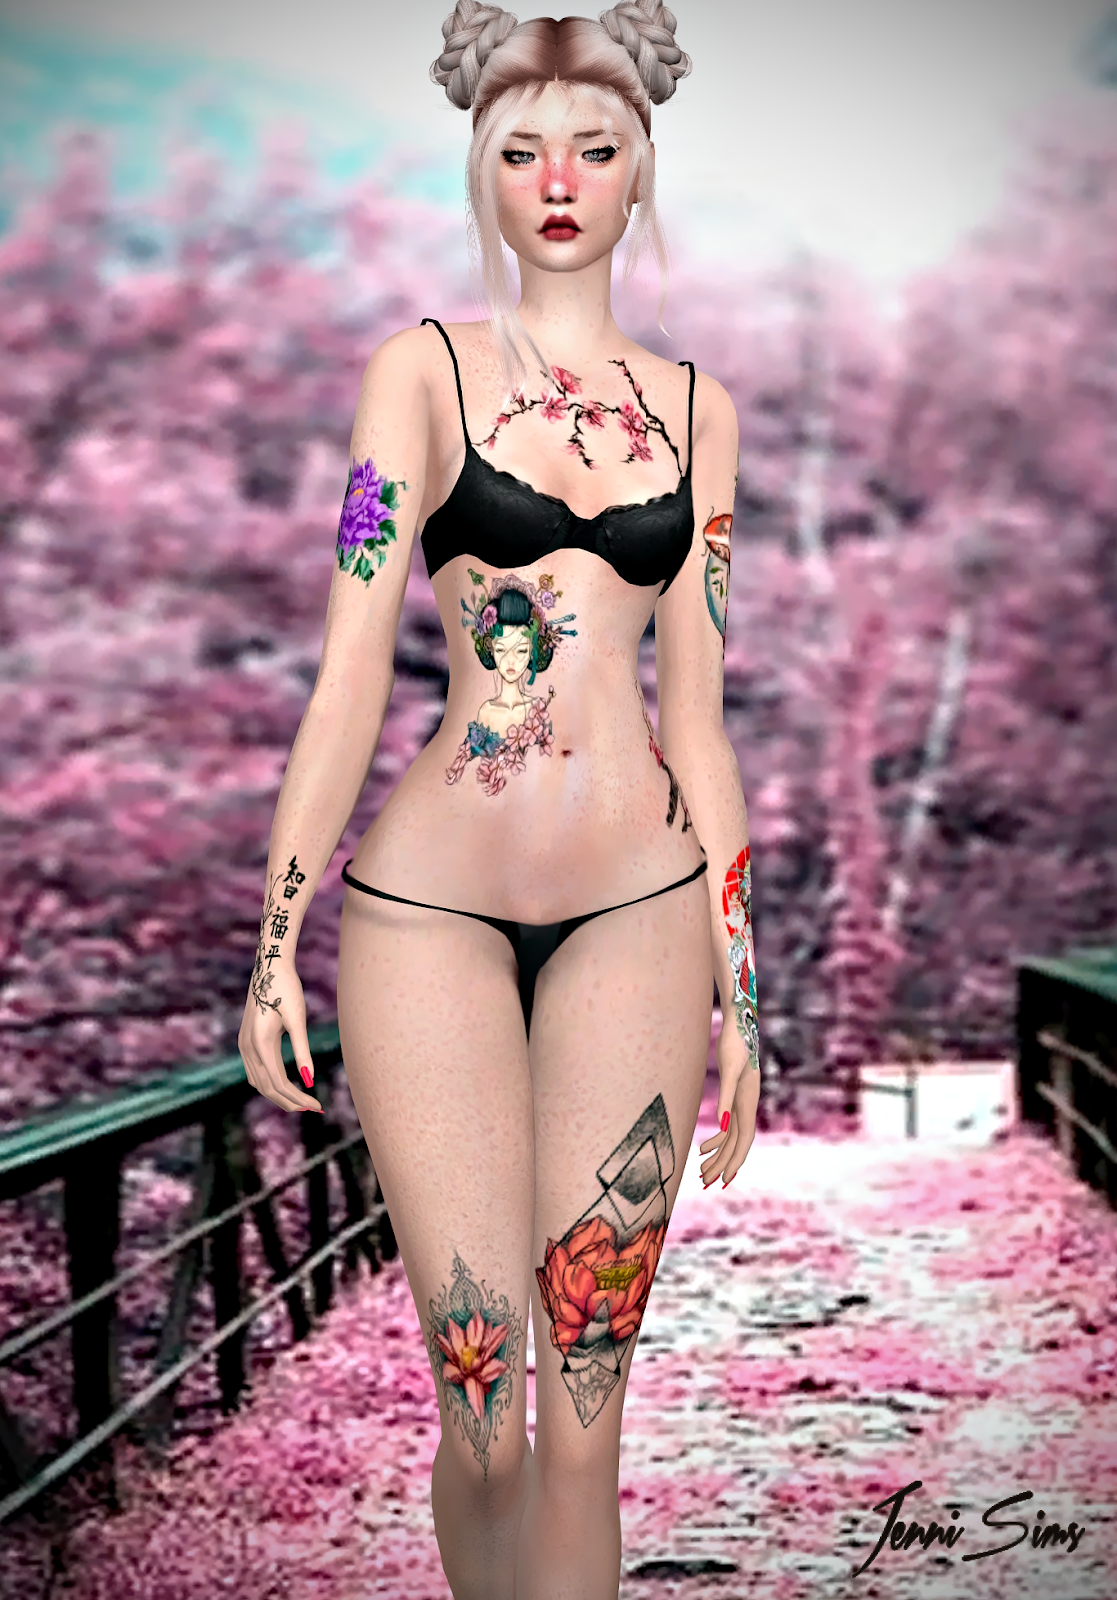 JenniSims: Downloads sims 4:Collection Tattoos Asian,Cyberean.